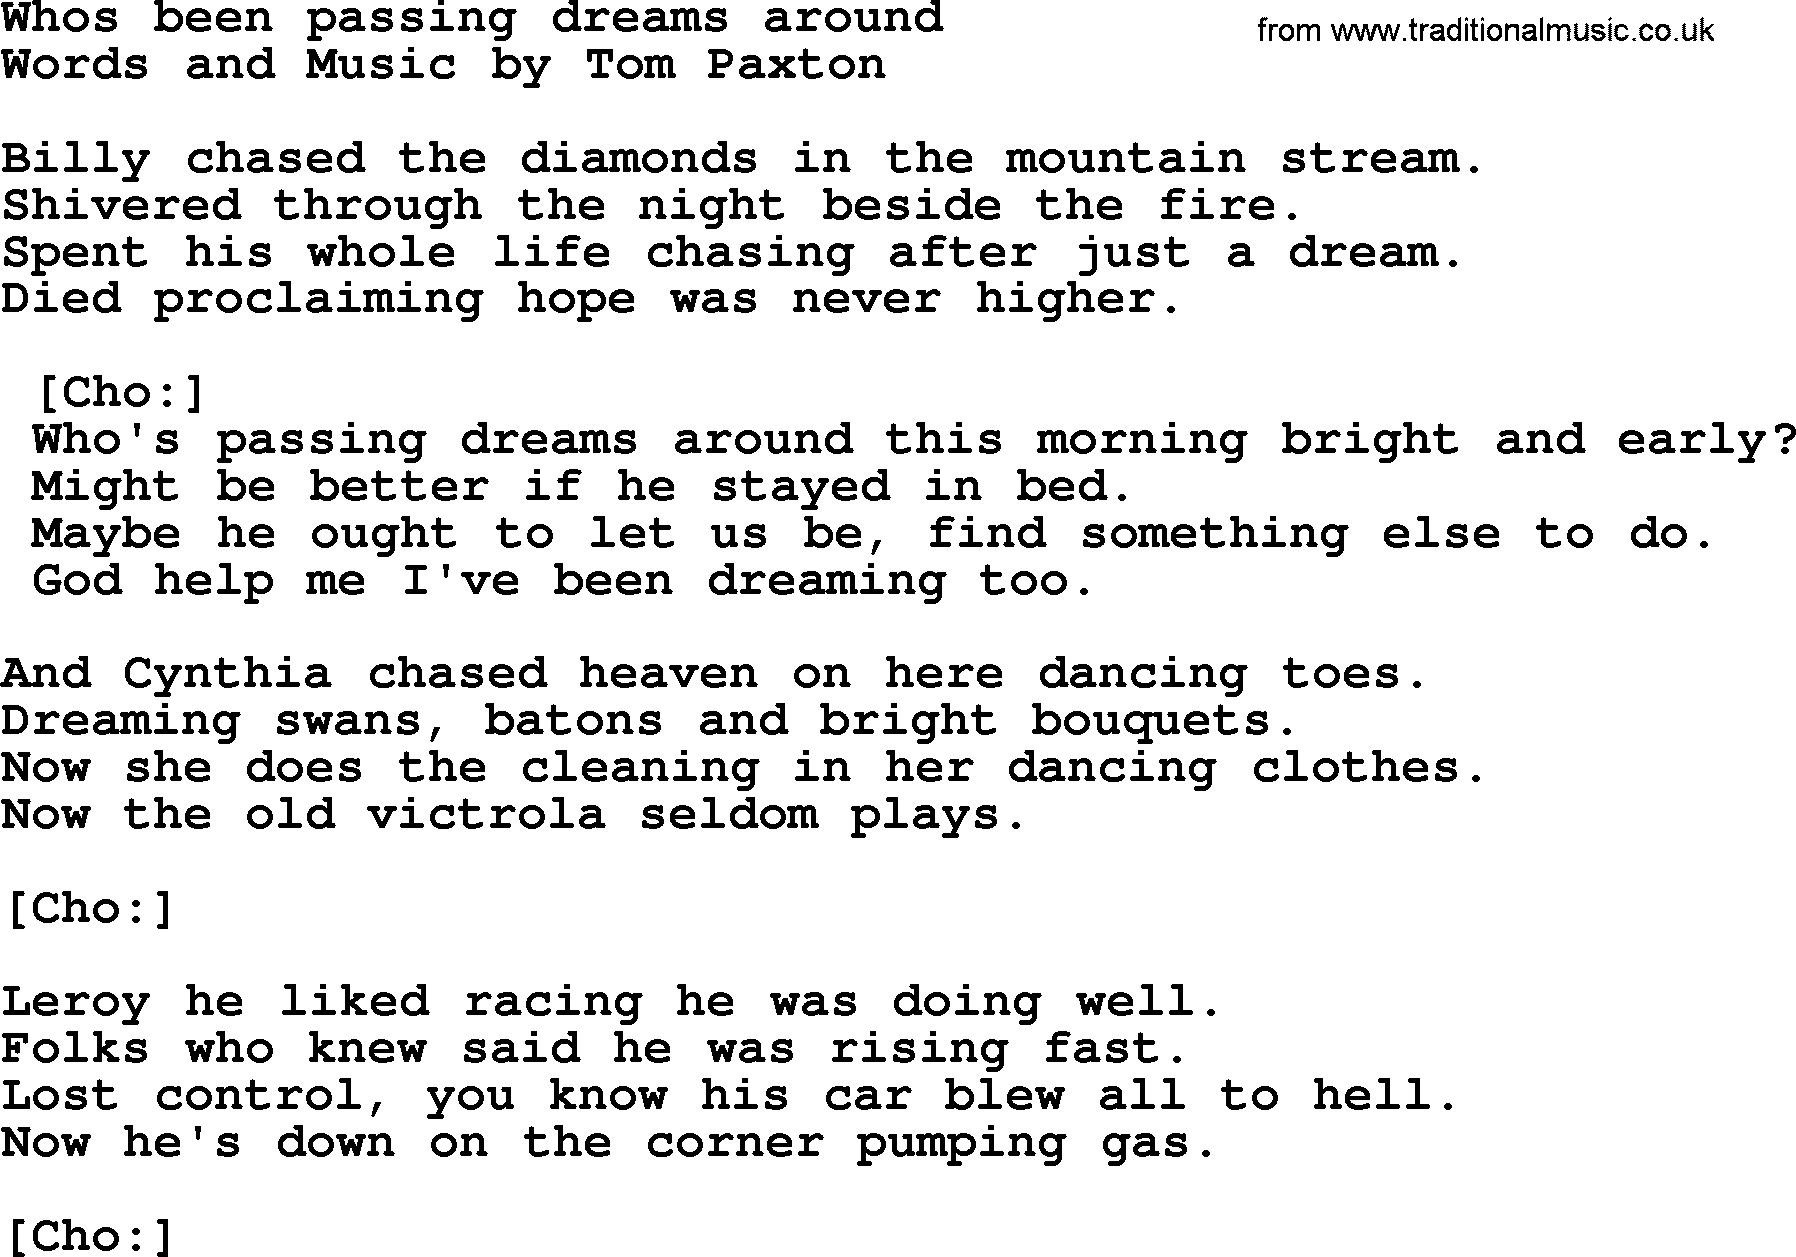 Tom Paxton song: Whos Been Passing Dreams Around, lyrics